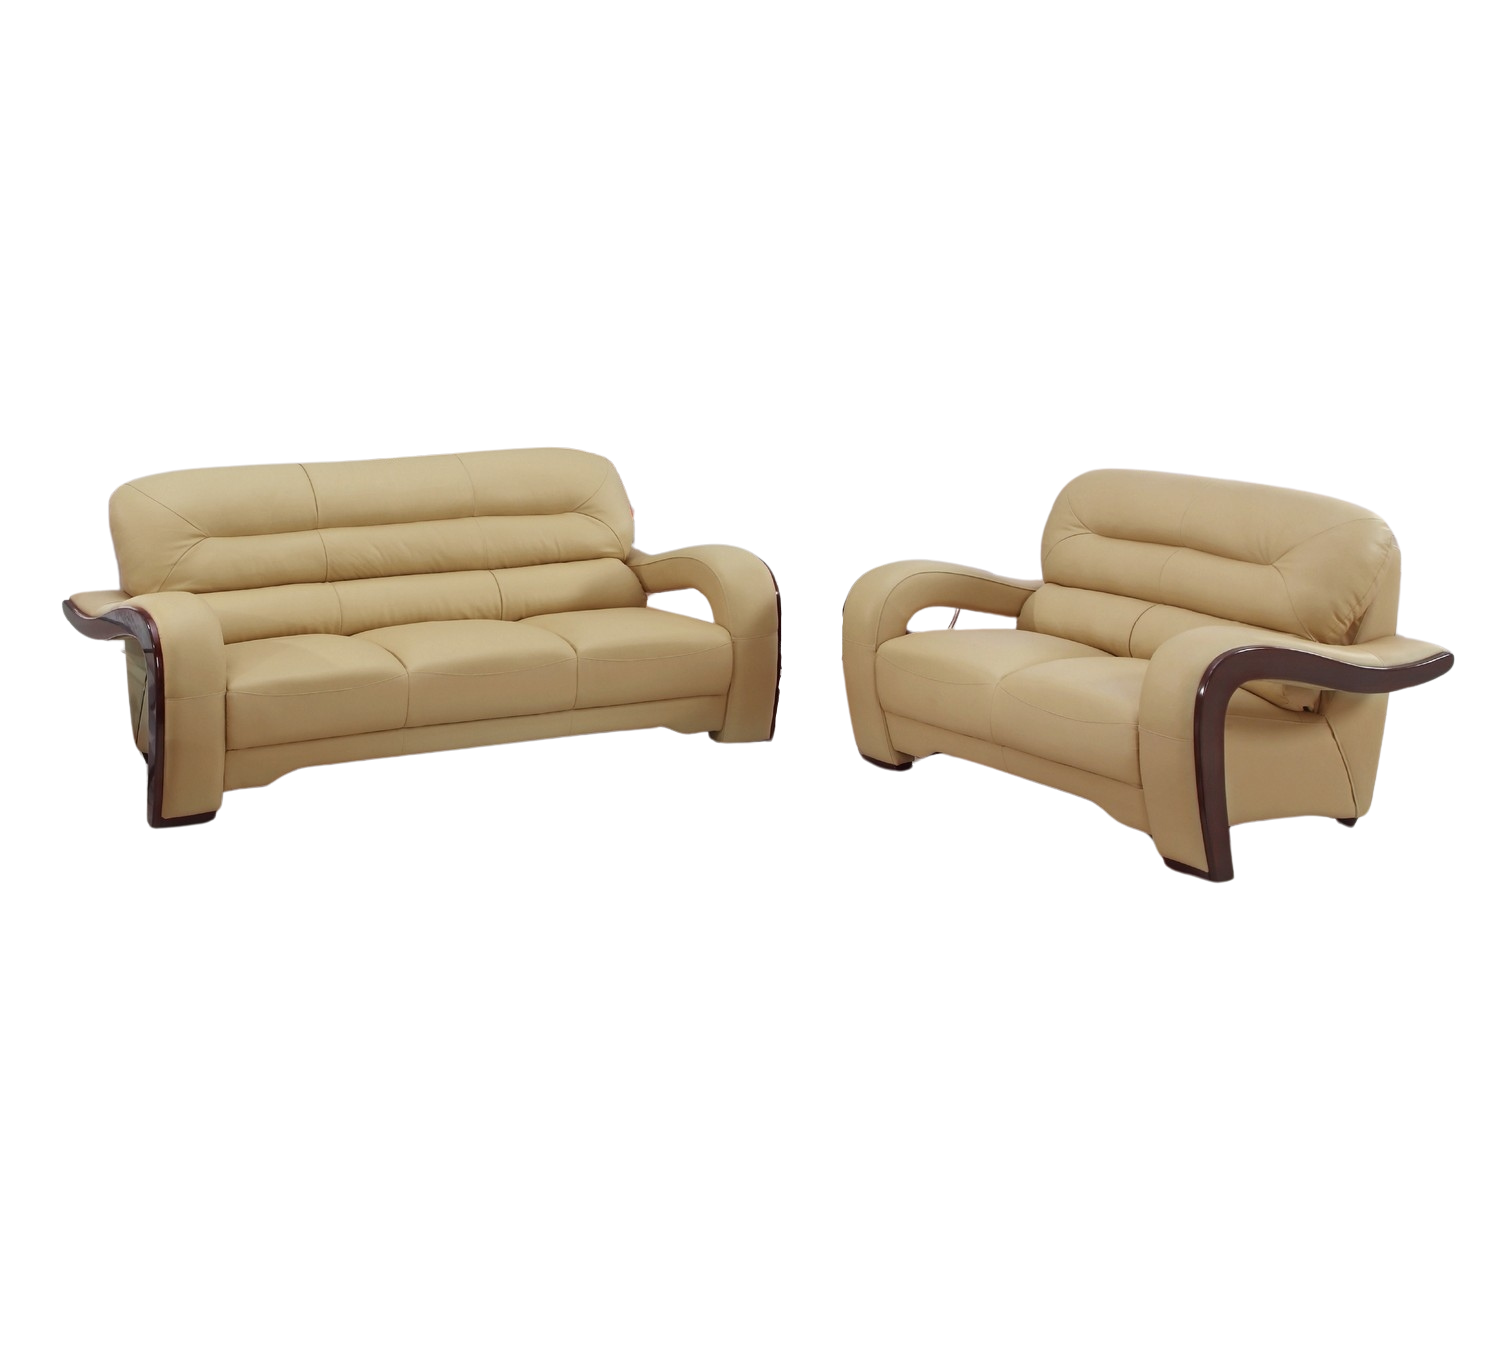 Two Piece Indoor Beige Genuine Leather Five Person Seating Set-343874-1